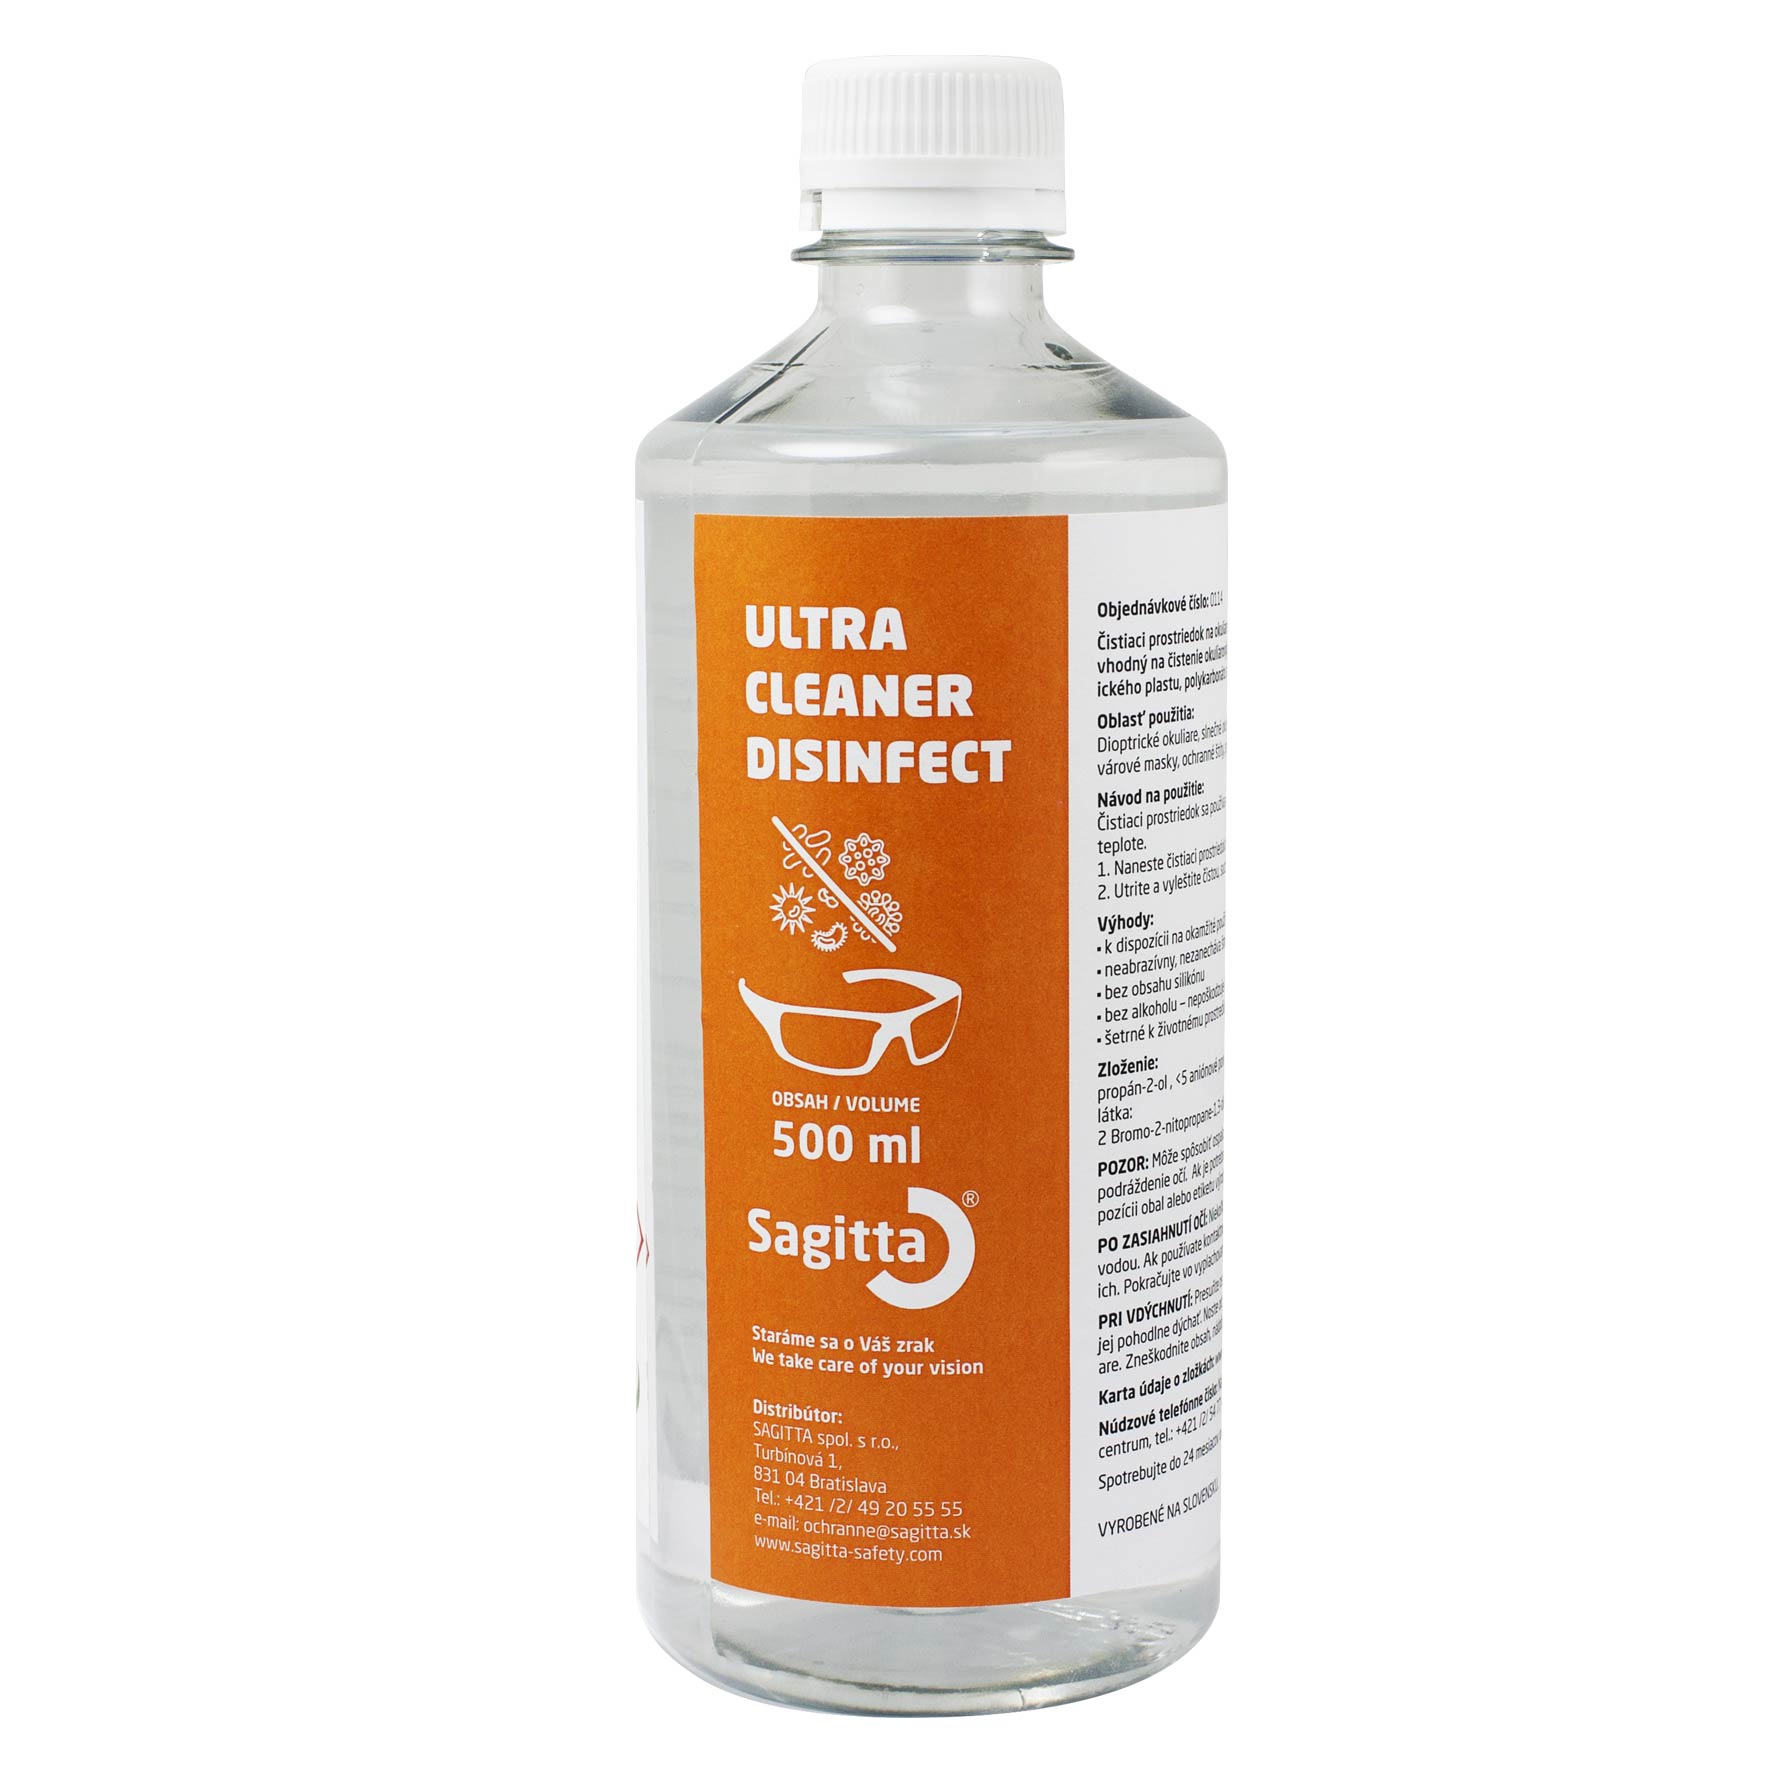 ULTRA CLEANER DISINFECT